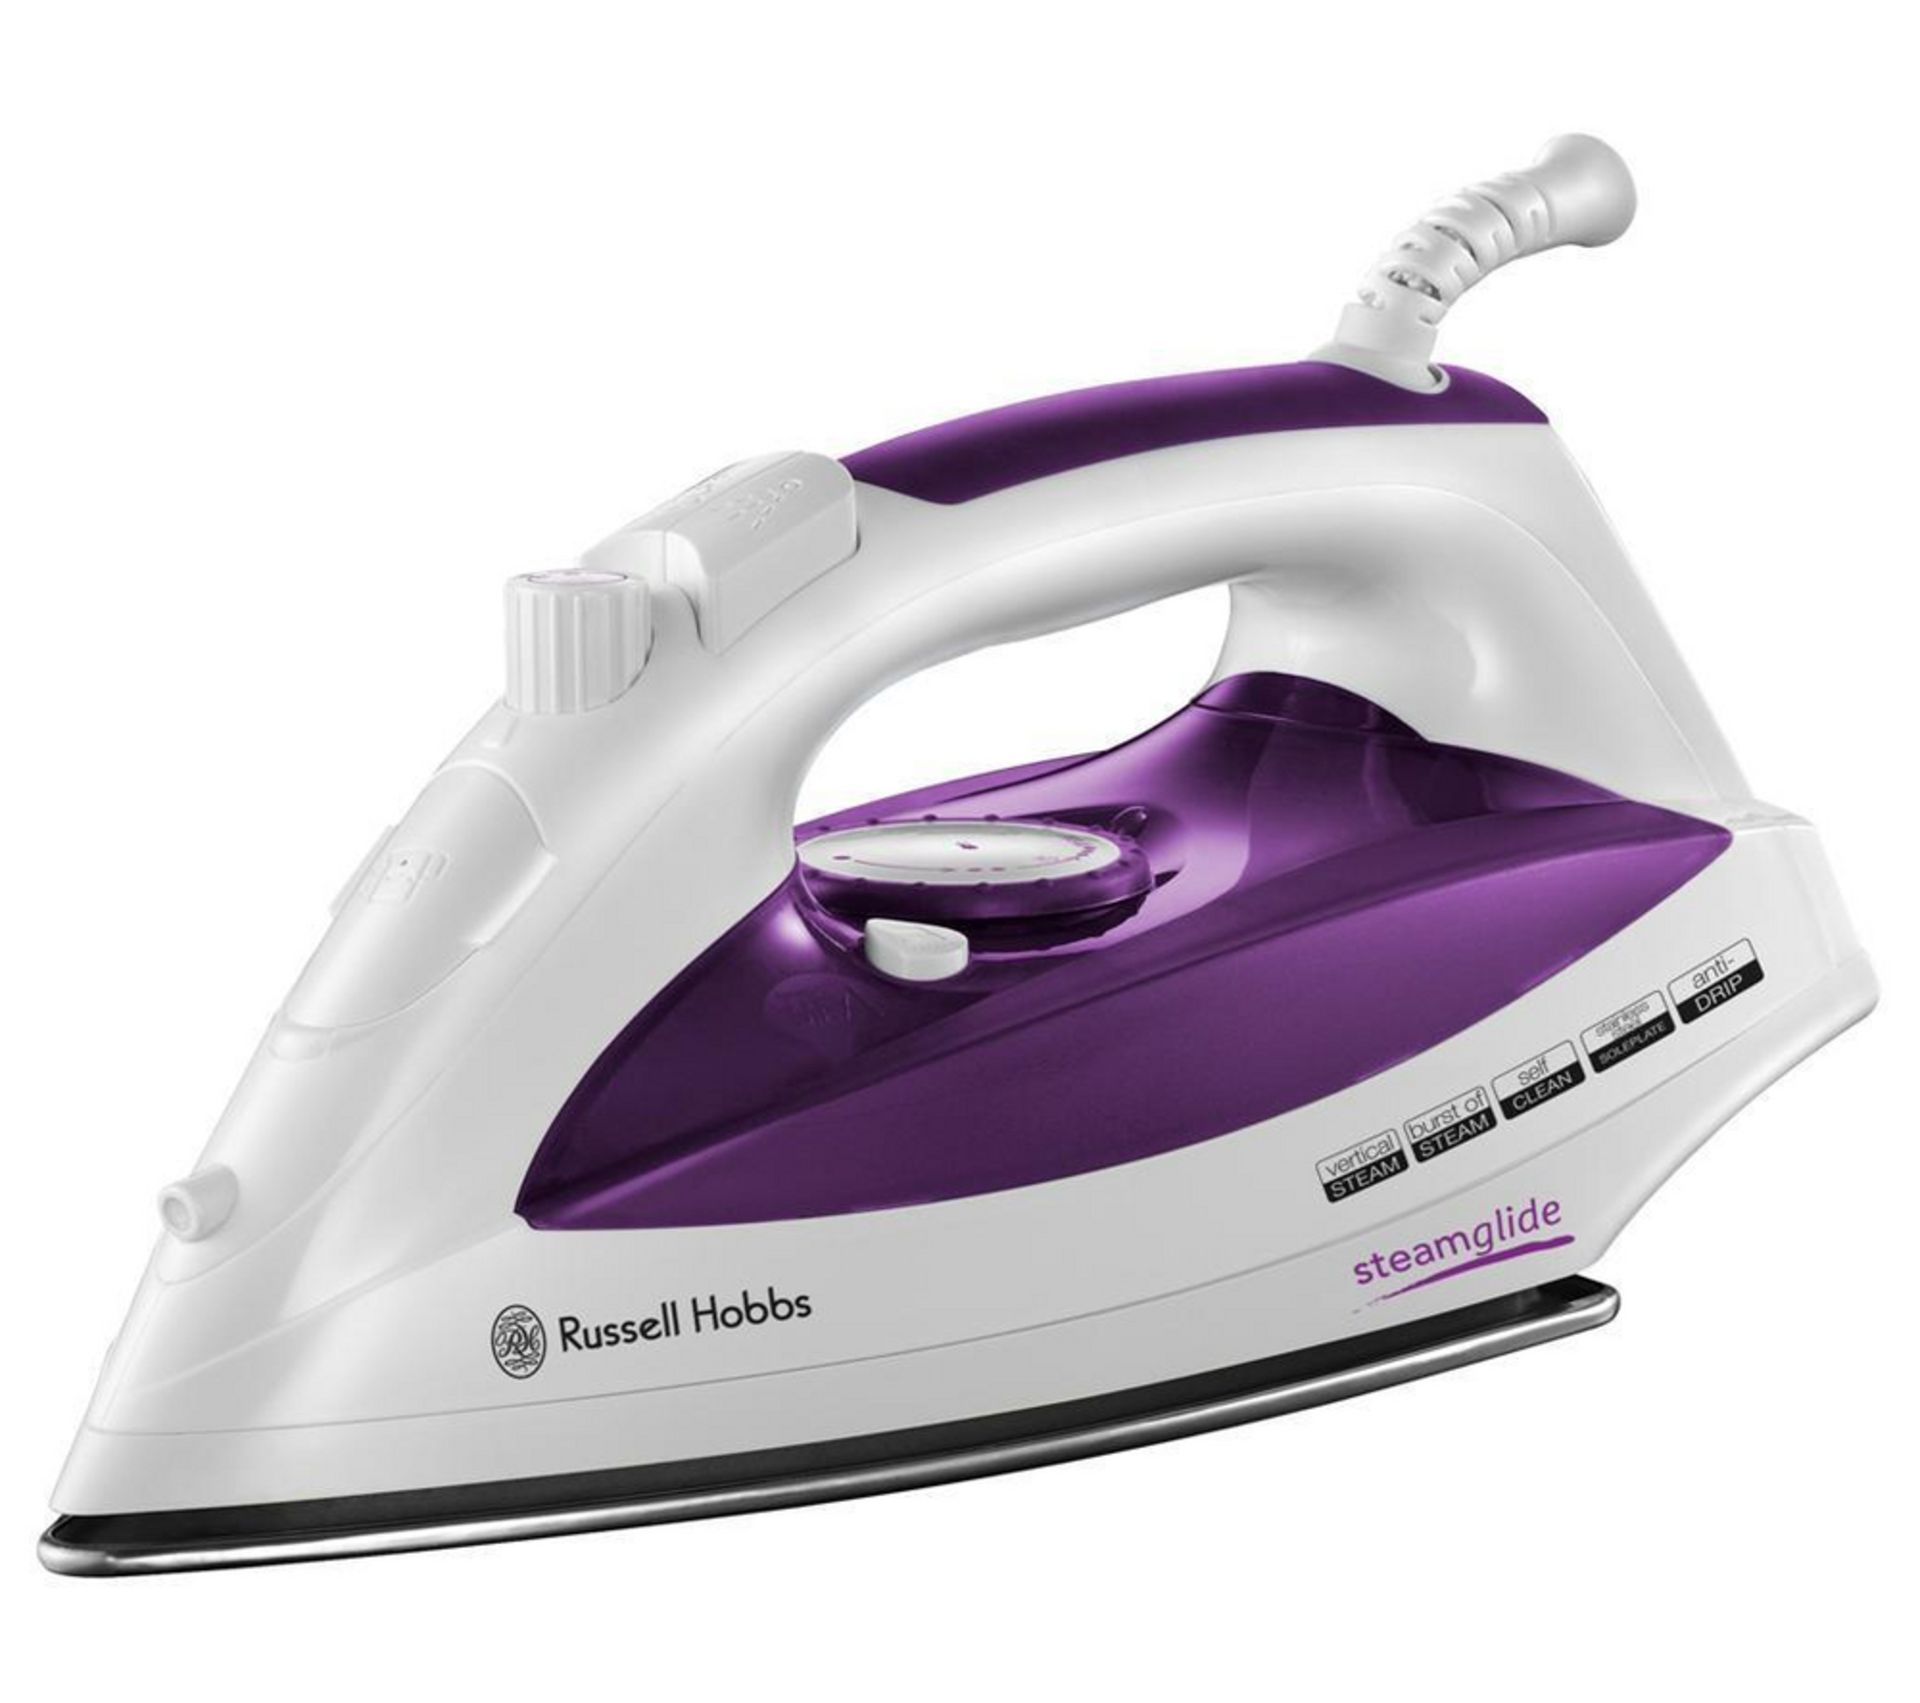 V Brand New Russell Hobbs Steamglide Iron 2400W - Stainless Steel Plate - Self Clean- Anti Drip - IS